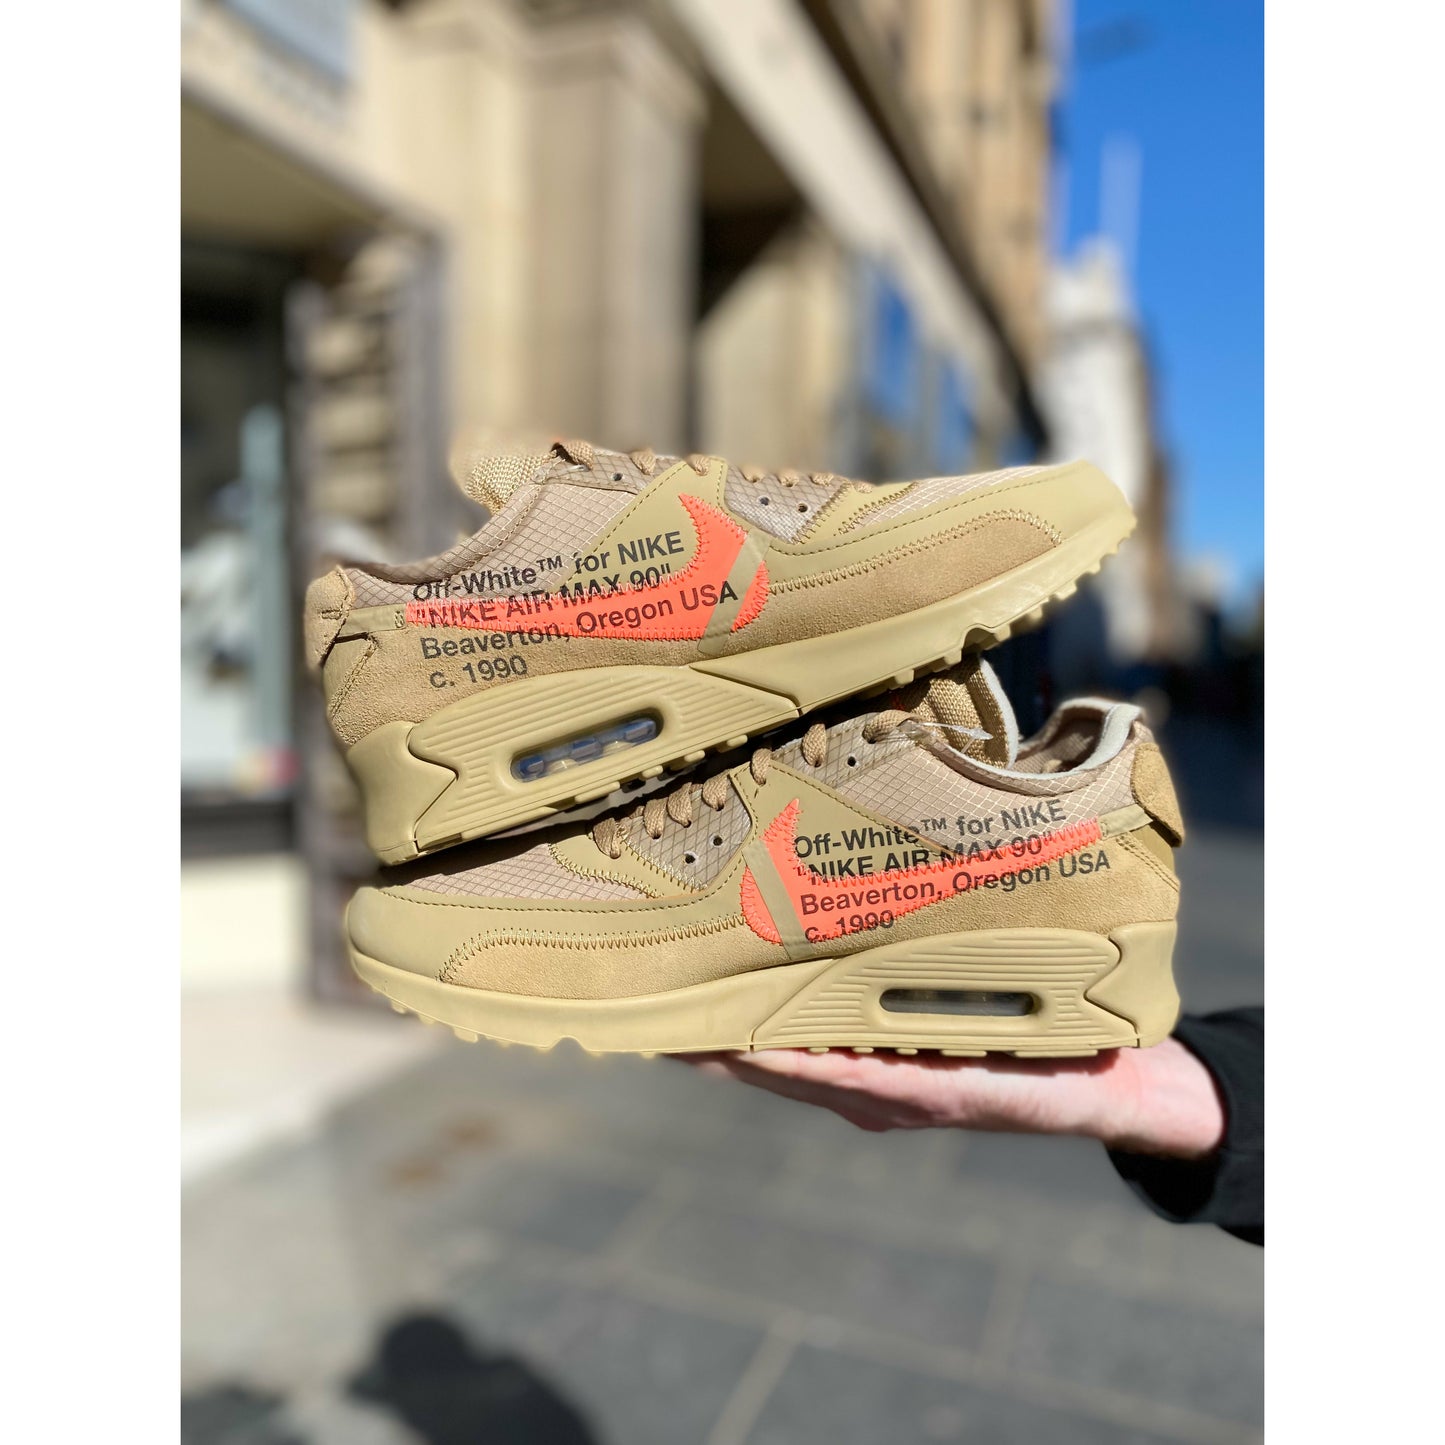 Nike Off White Air Max 90 Desert Ore by Nike from £550.00